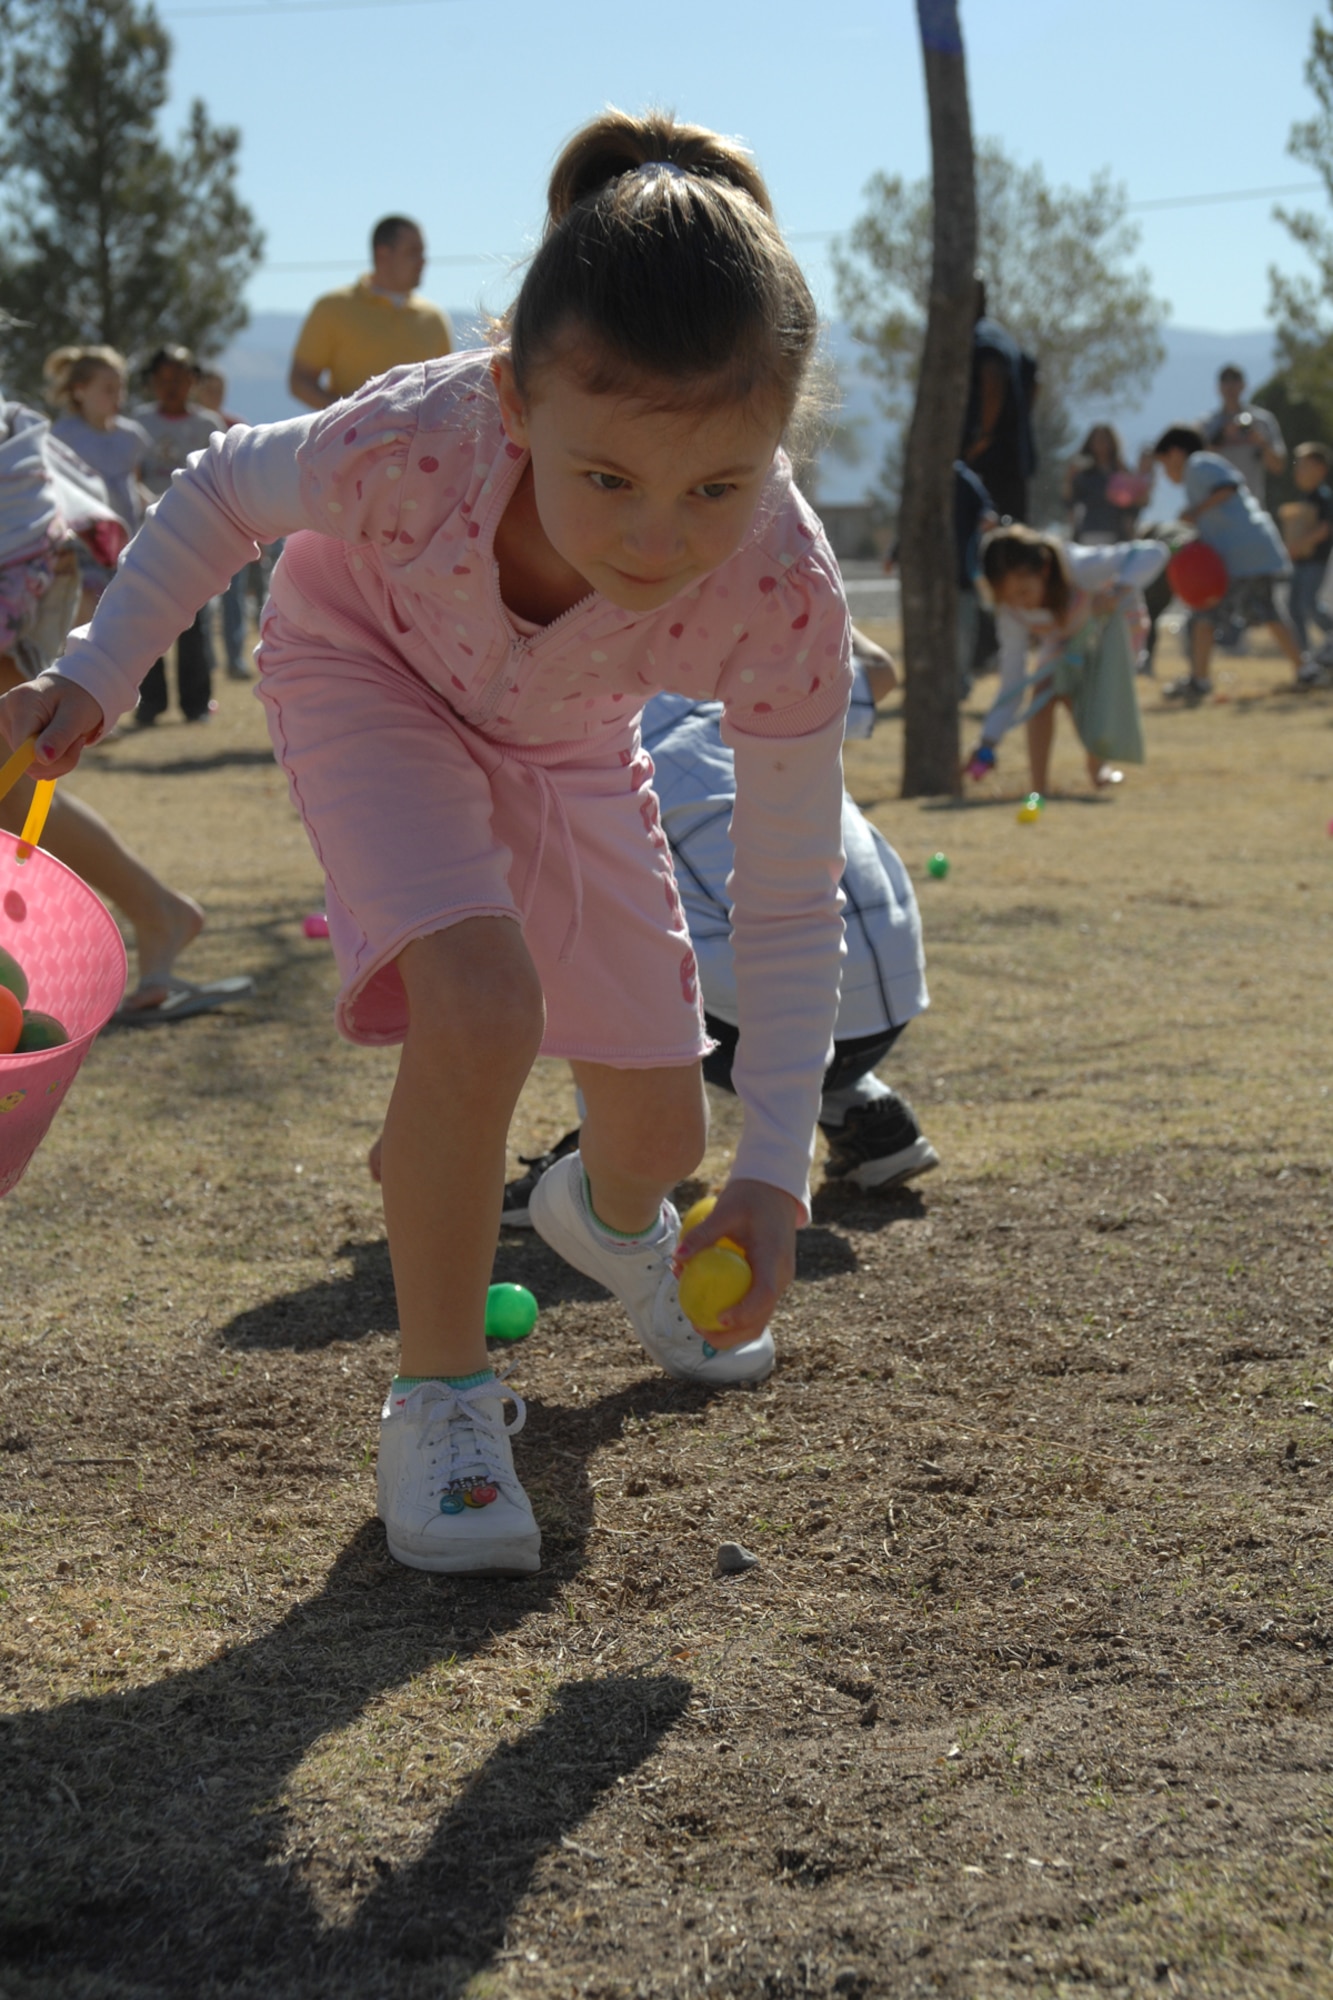 A girl collects eggs during the Base Wide Easter Egg Hunt March 22 at Steinhoff Park, Holloman Air Force Base, N.M. Six golden eggs were hidden throughout the park, which offered children chances to win prizes. (U.S. Air Force photo/Airman 1st Class Jamal D. Sutter)